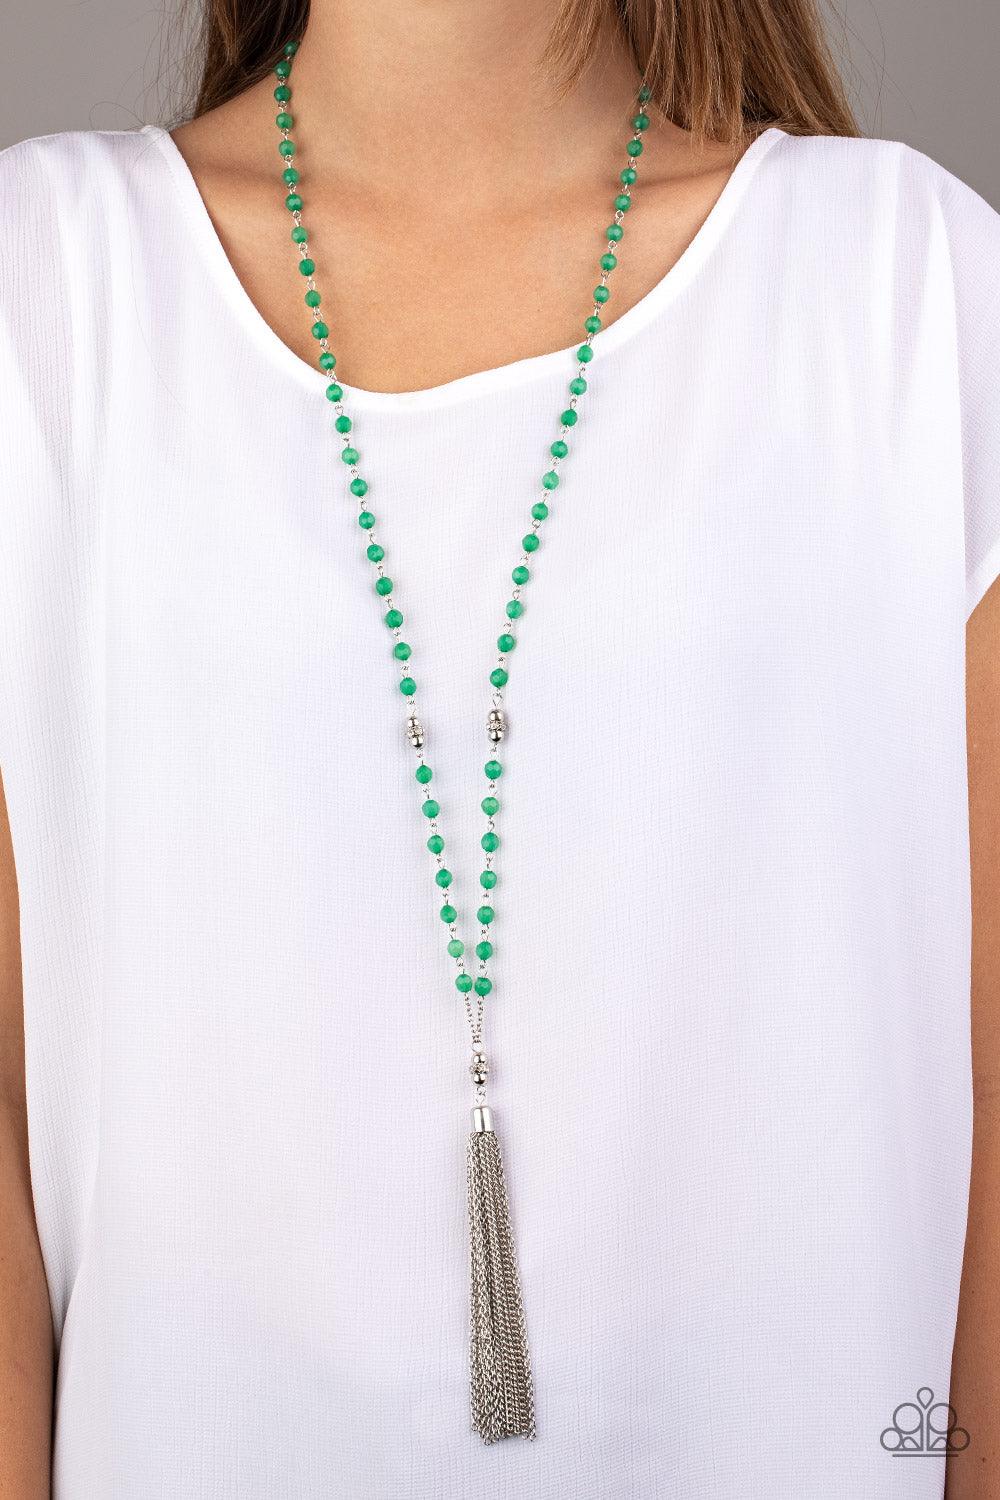 Paparazzi Accessories Tassel Takeover - Green Green opaque crystal-like beads, shiny silver beads, and white rhinestone encrusted rings give way to a shimmery silver tassel for a whimsical look. Features an adjustable clasp closure. Sold as one individual